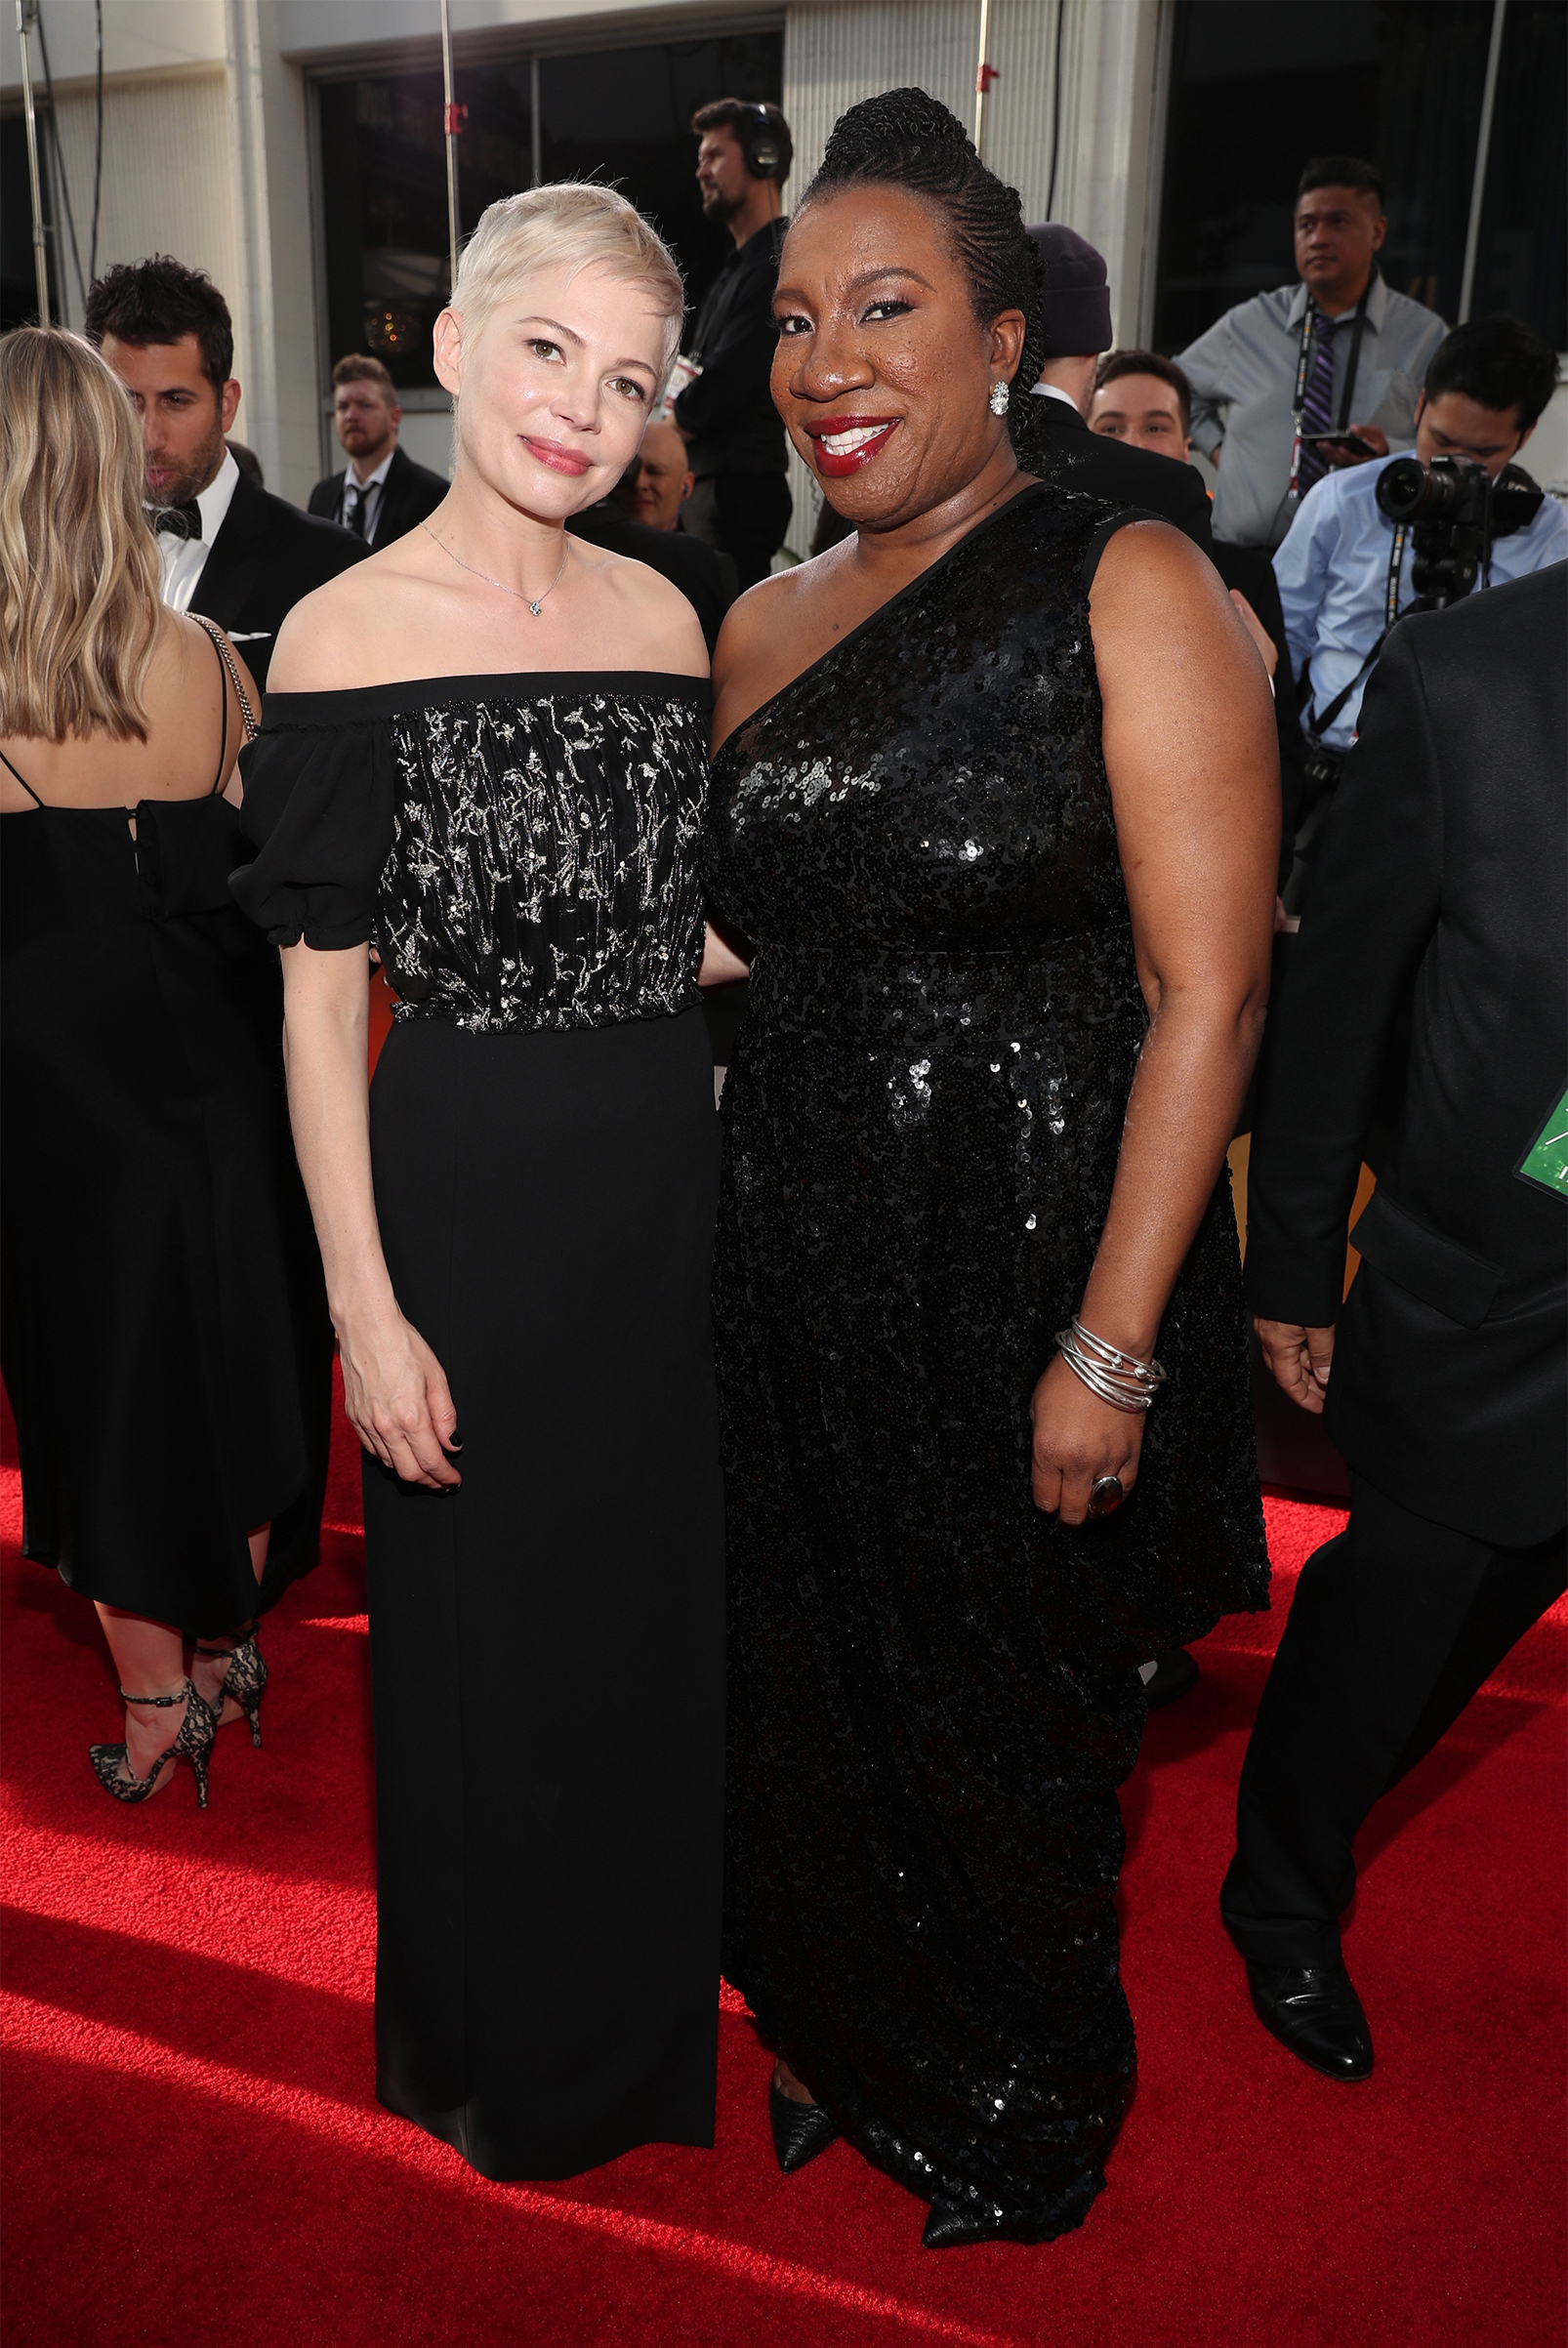 Actor Michelle Williams and activist Tarana Burke arrive to the 75th Annual Golden Globe Awards held at the Beverly Hilton Hotel on January 7, 2018. (Christopher Polk— NBC/Getty Images)